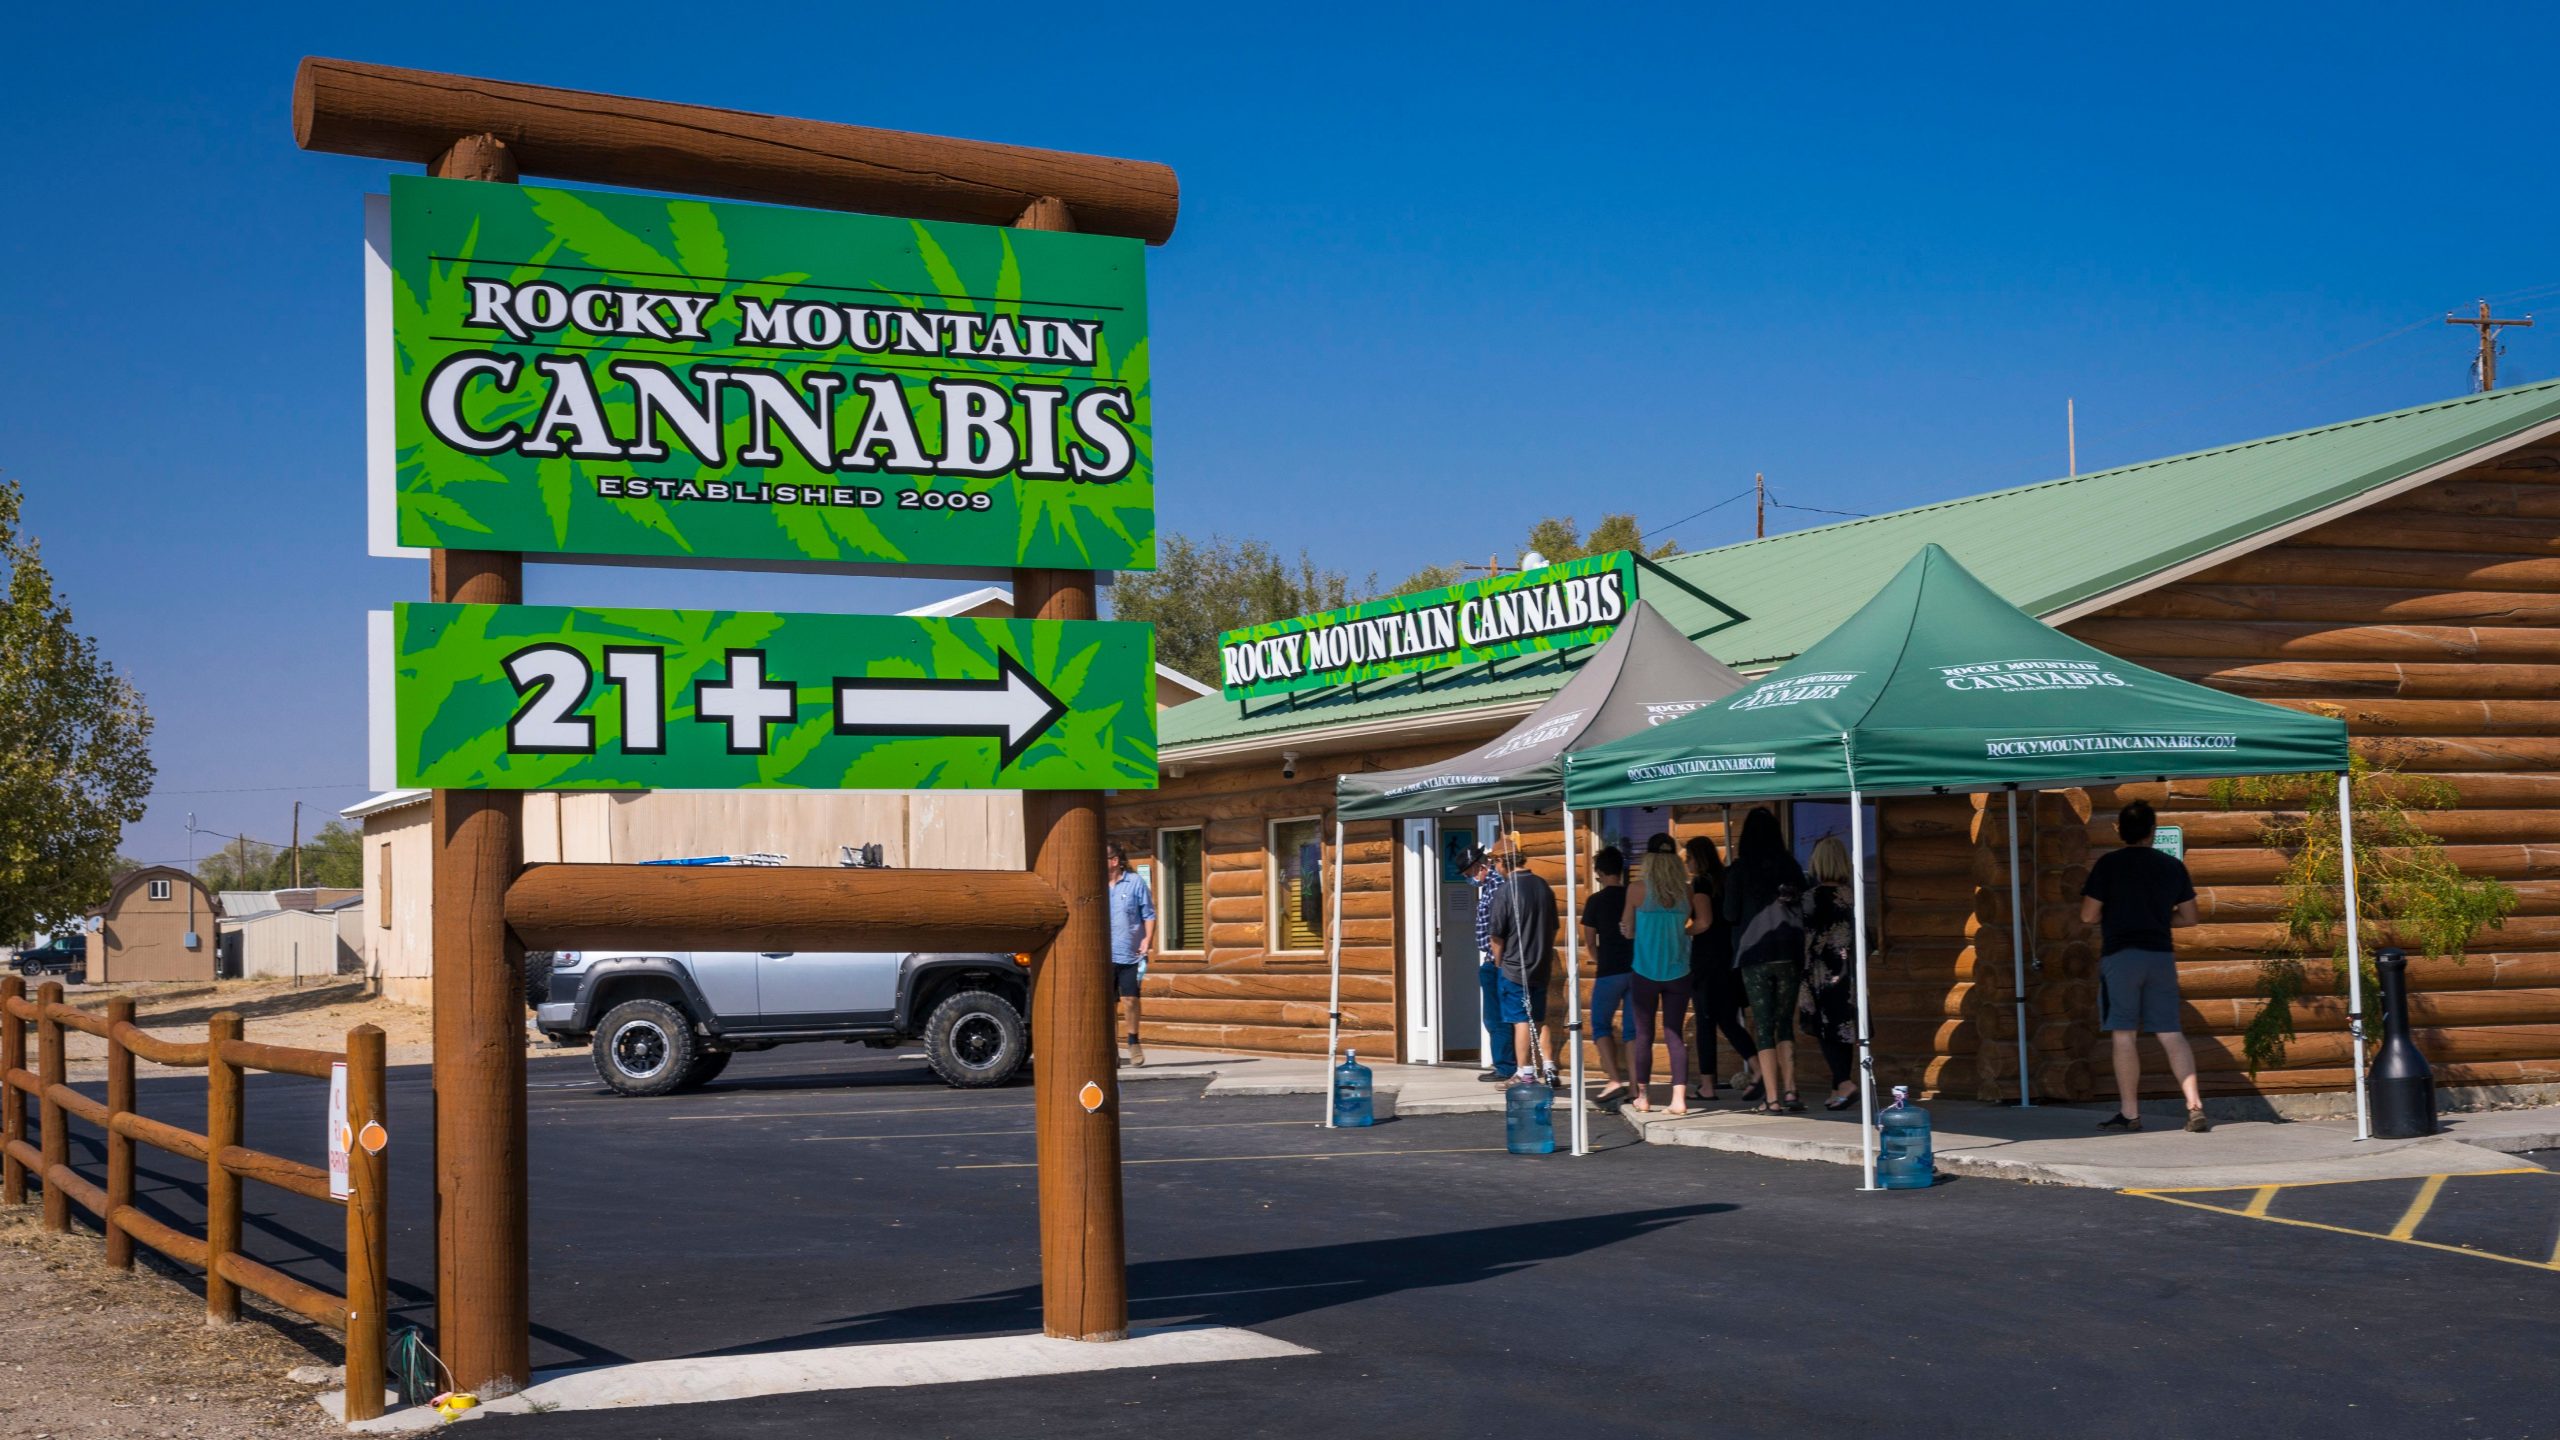 People in line at Rocky Mountain Cannabis Store, a cannabis dispensary in Dinosaur, Colorado.